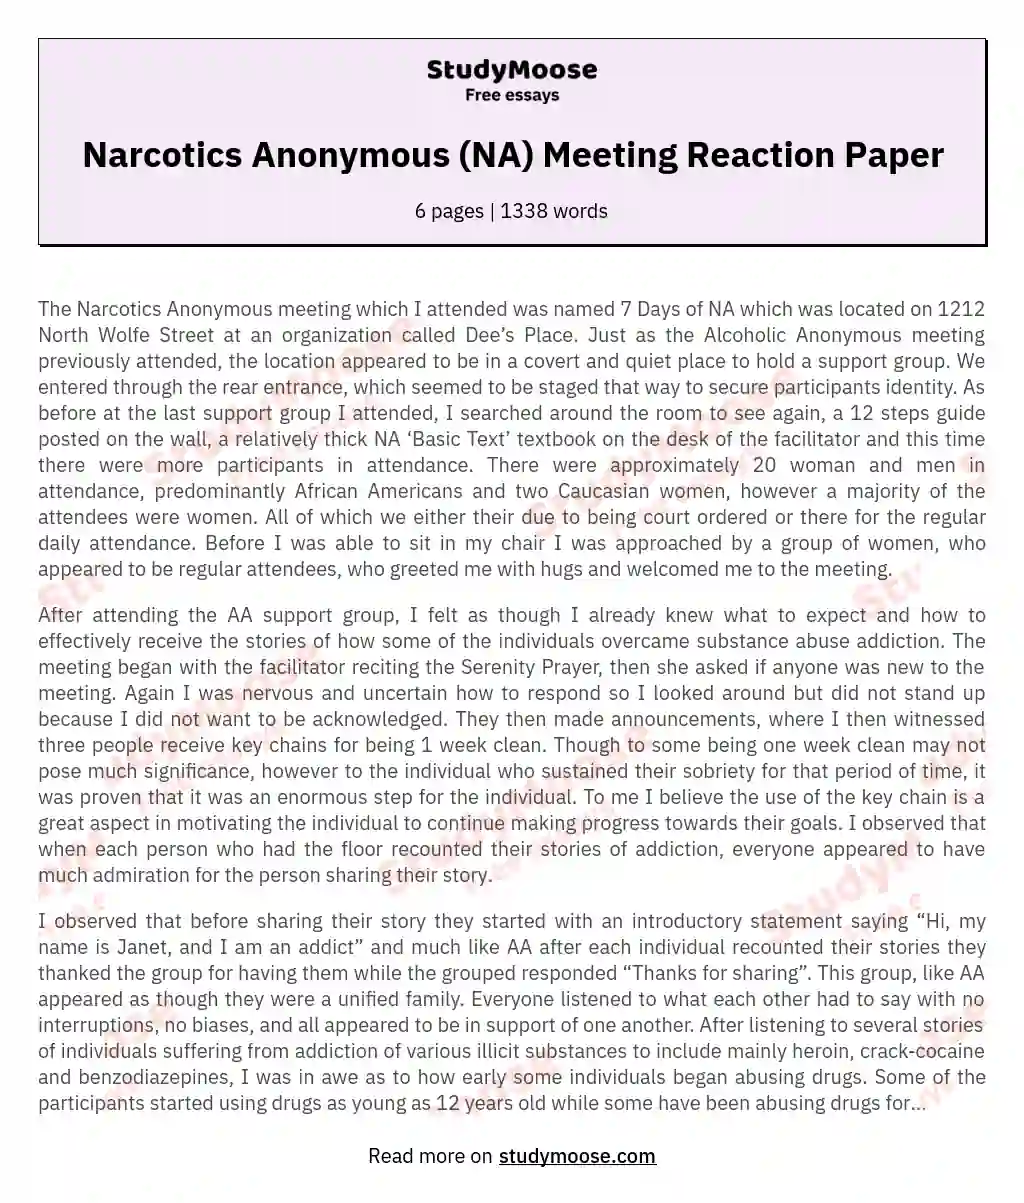 Narcotics Anonymous (NA) Meeting Reaction Paper essay